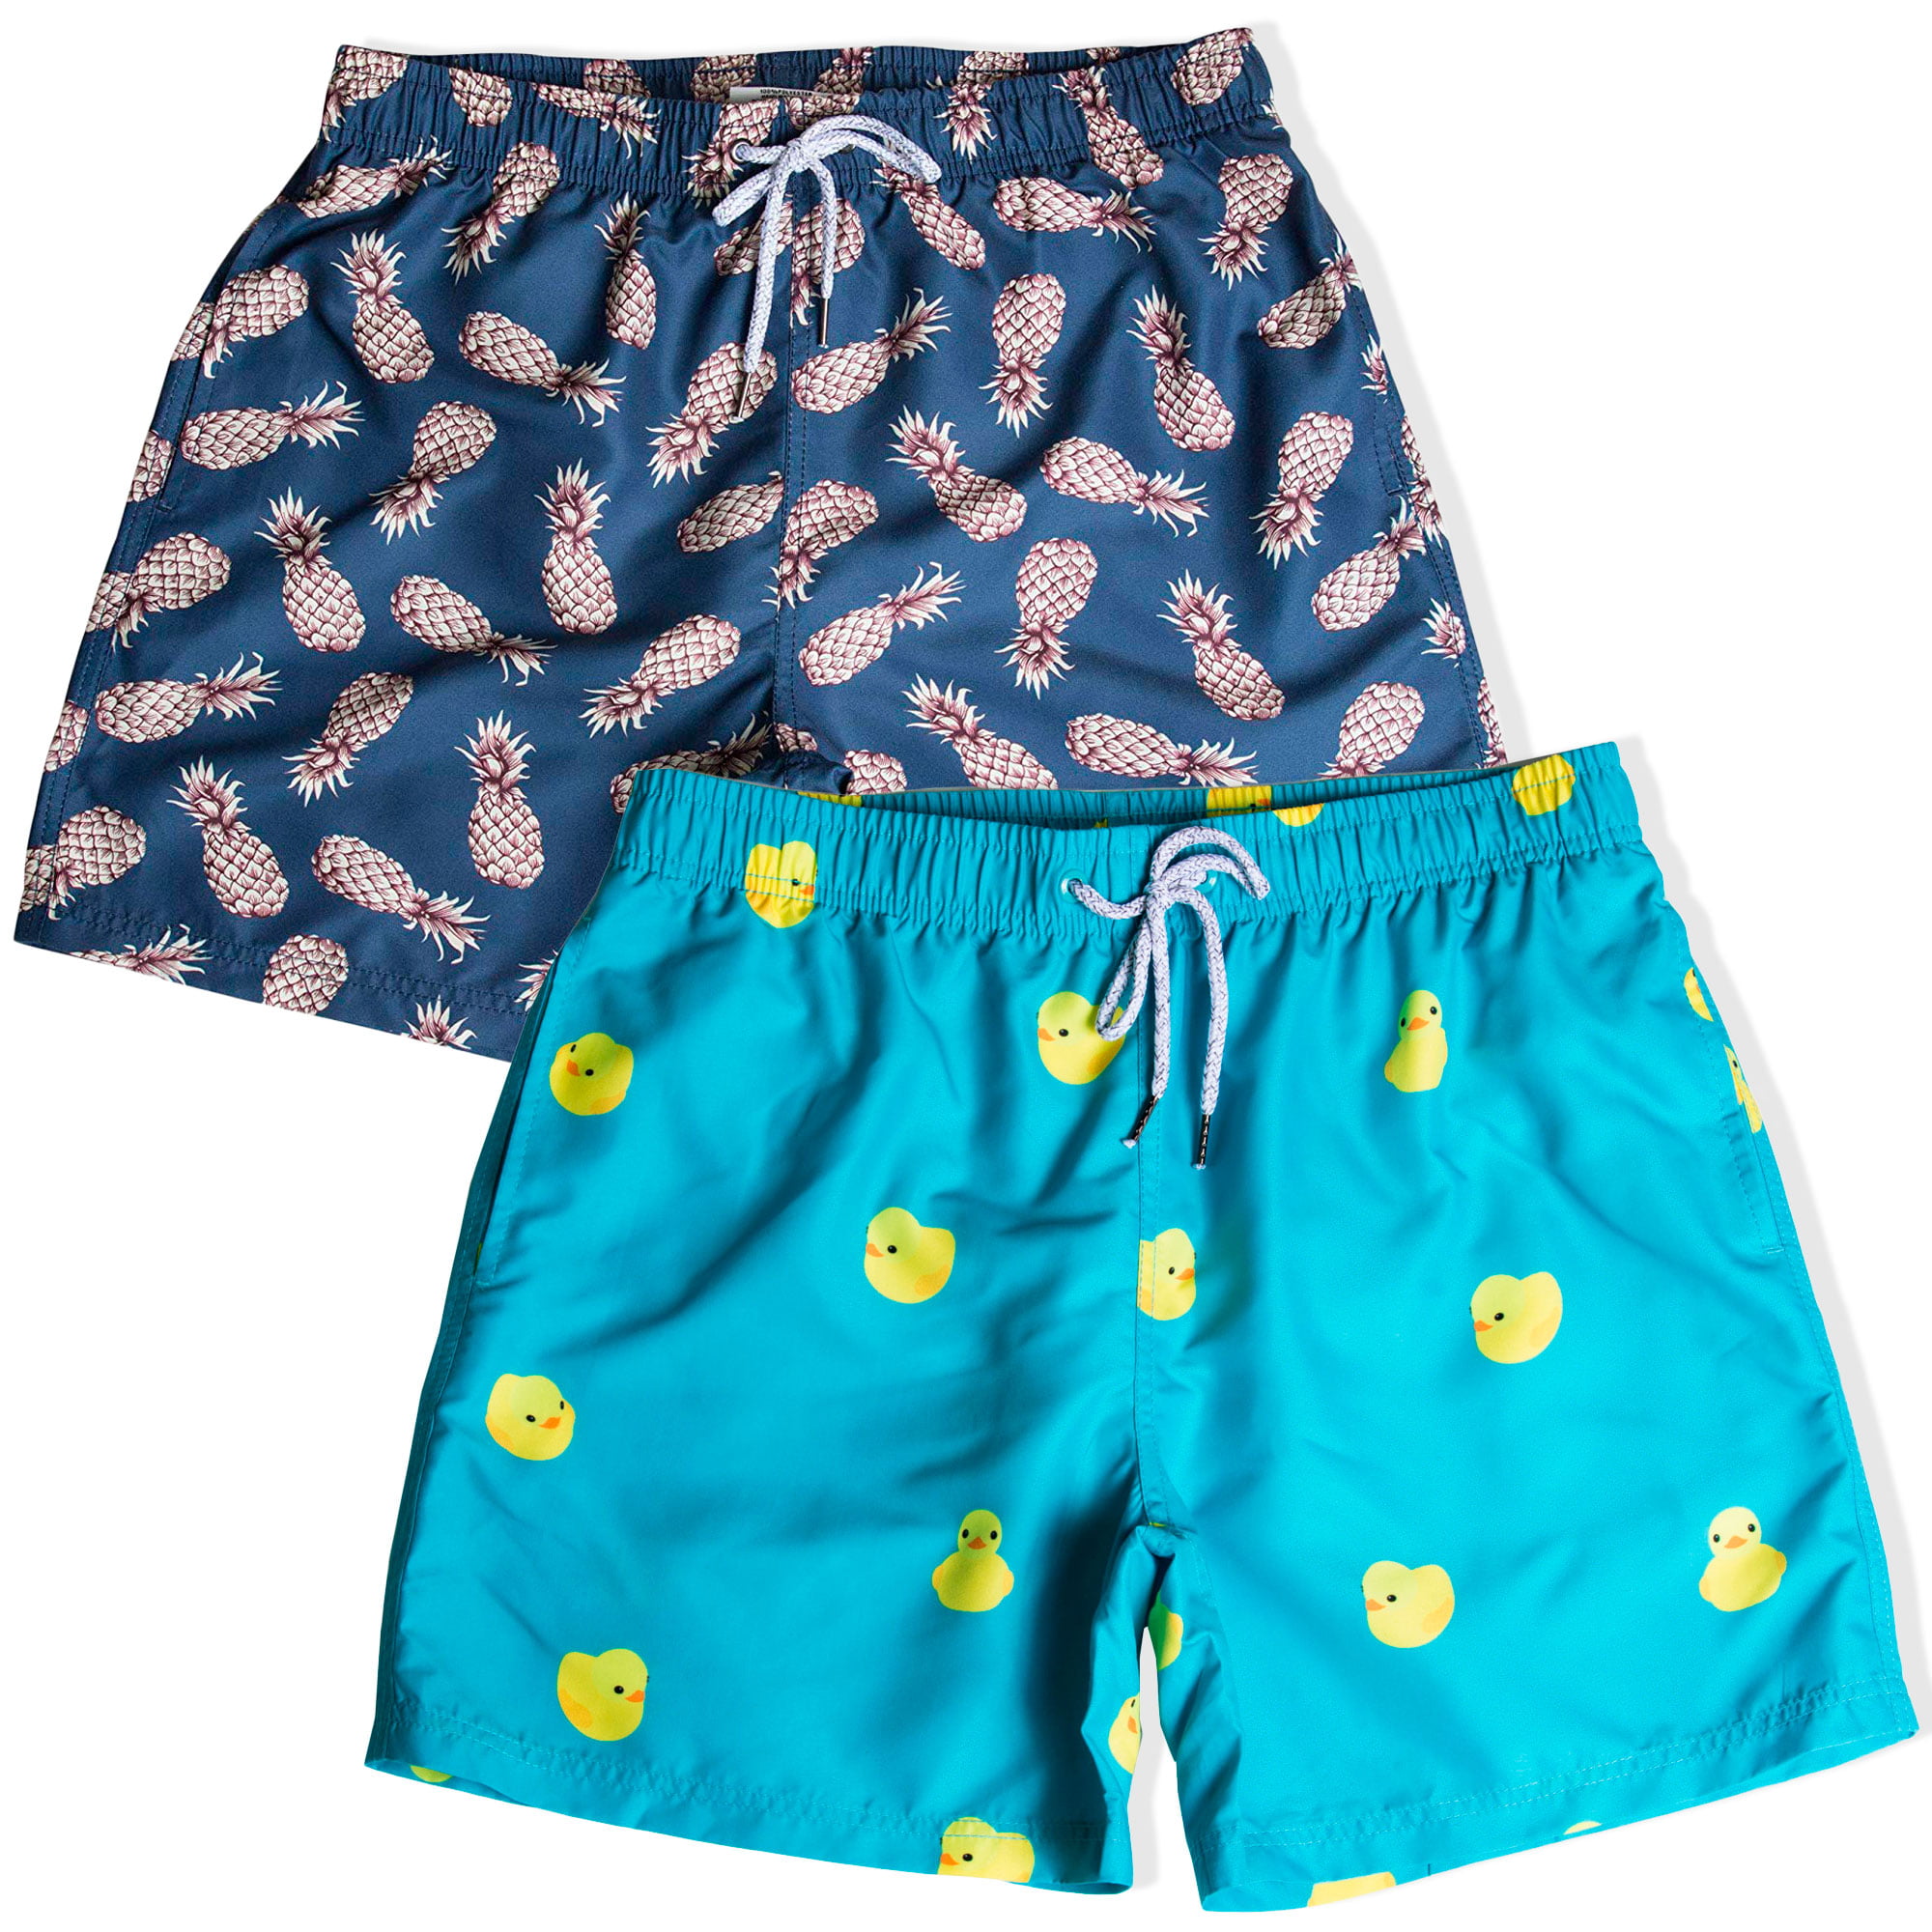 Rubber Ducks Mens Swim Trunks Quick Dry Board Shorts with Pockets Summer Swimsuit Beach Short